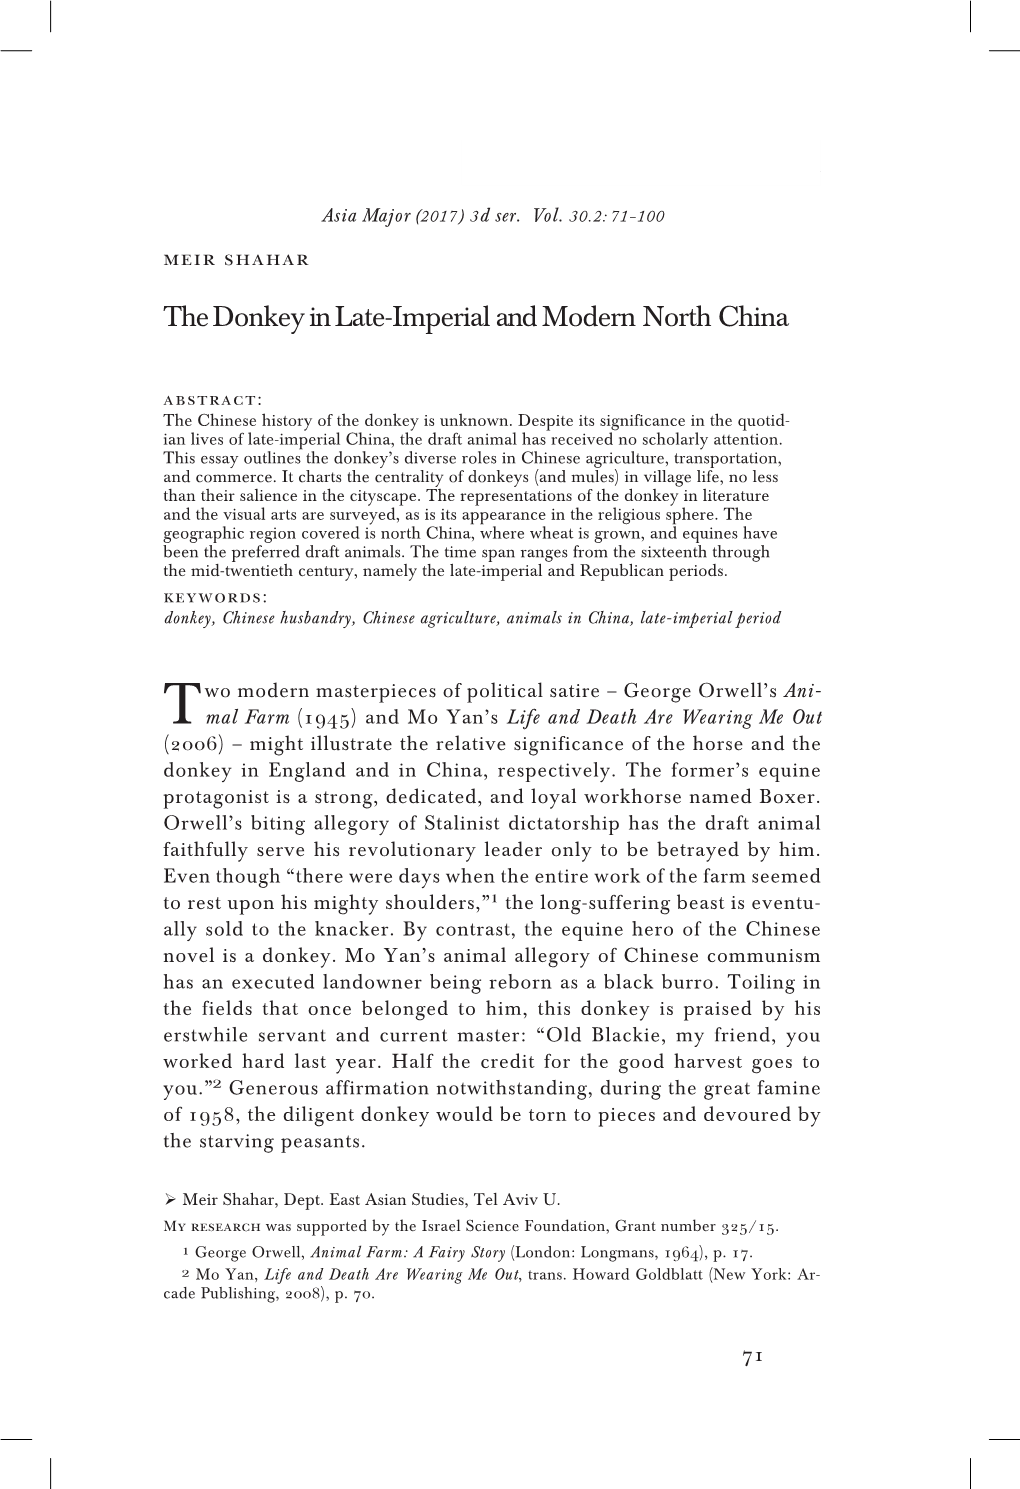 The Donkey in Late-Imperial and Modern North China